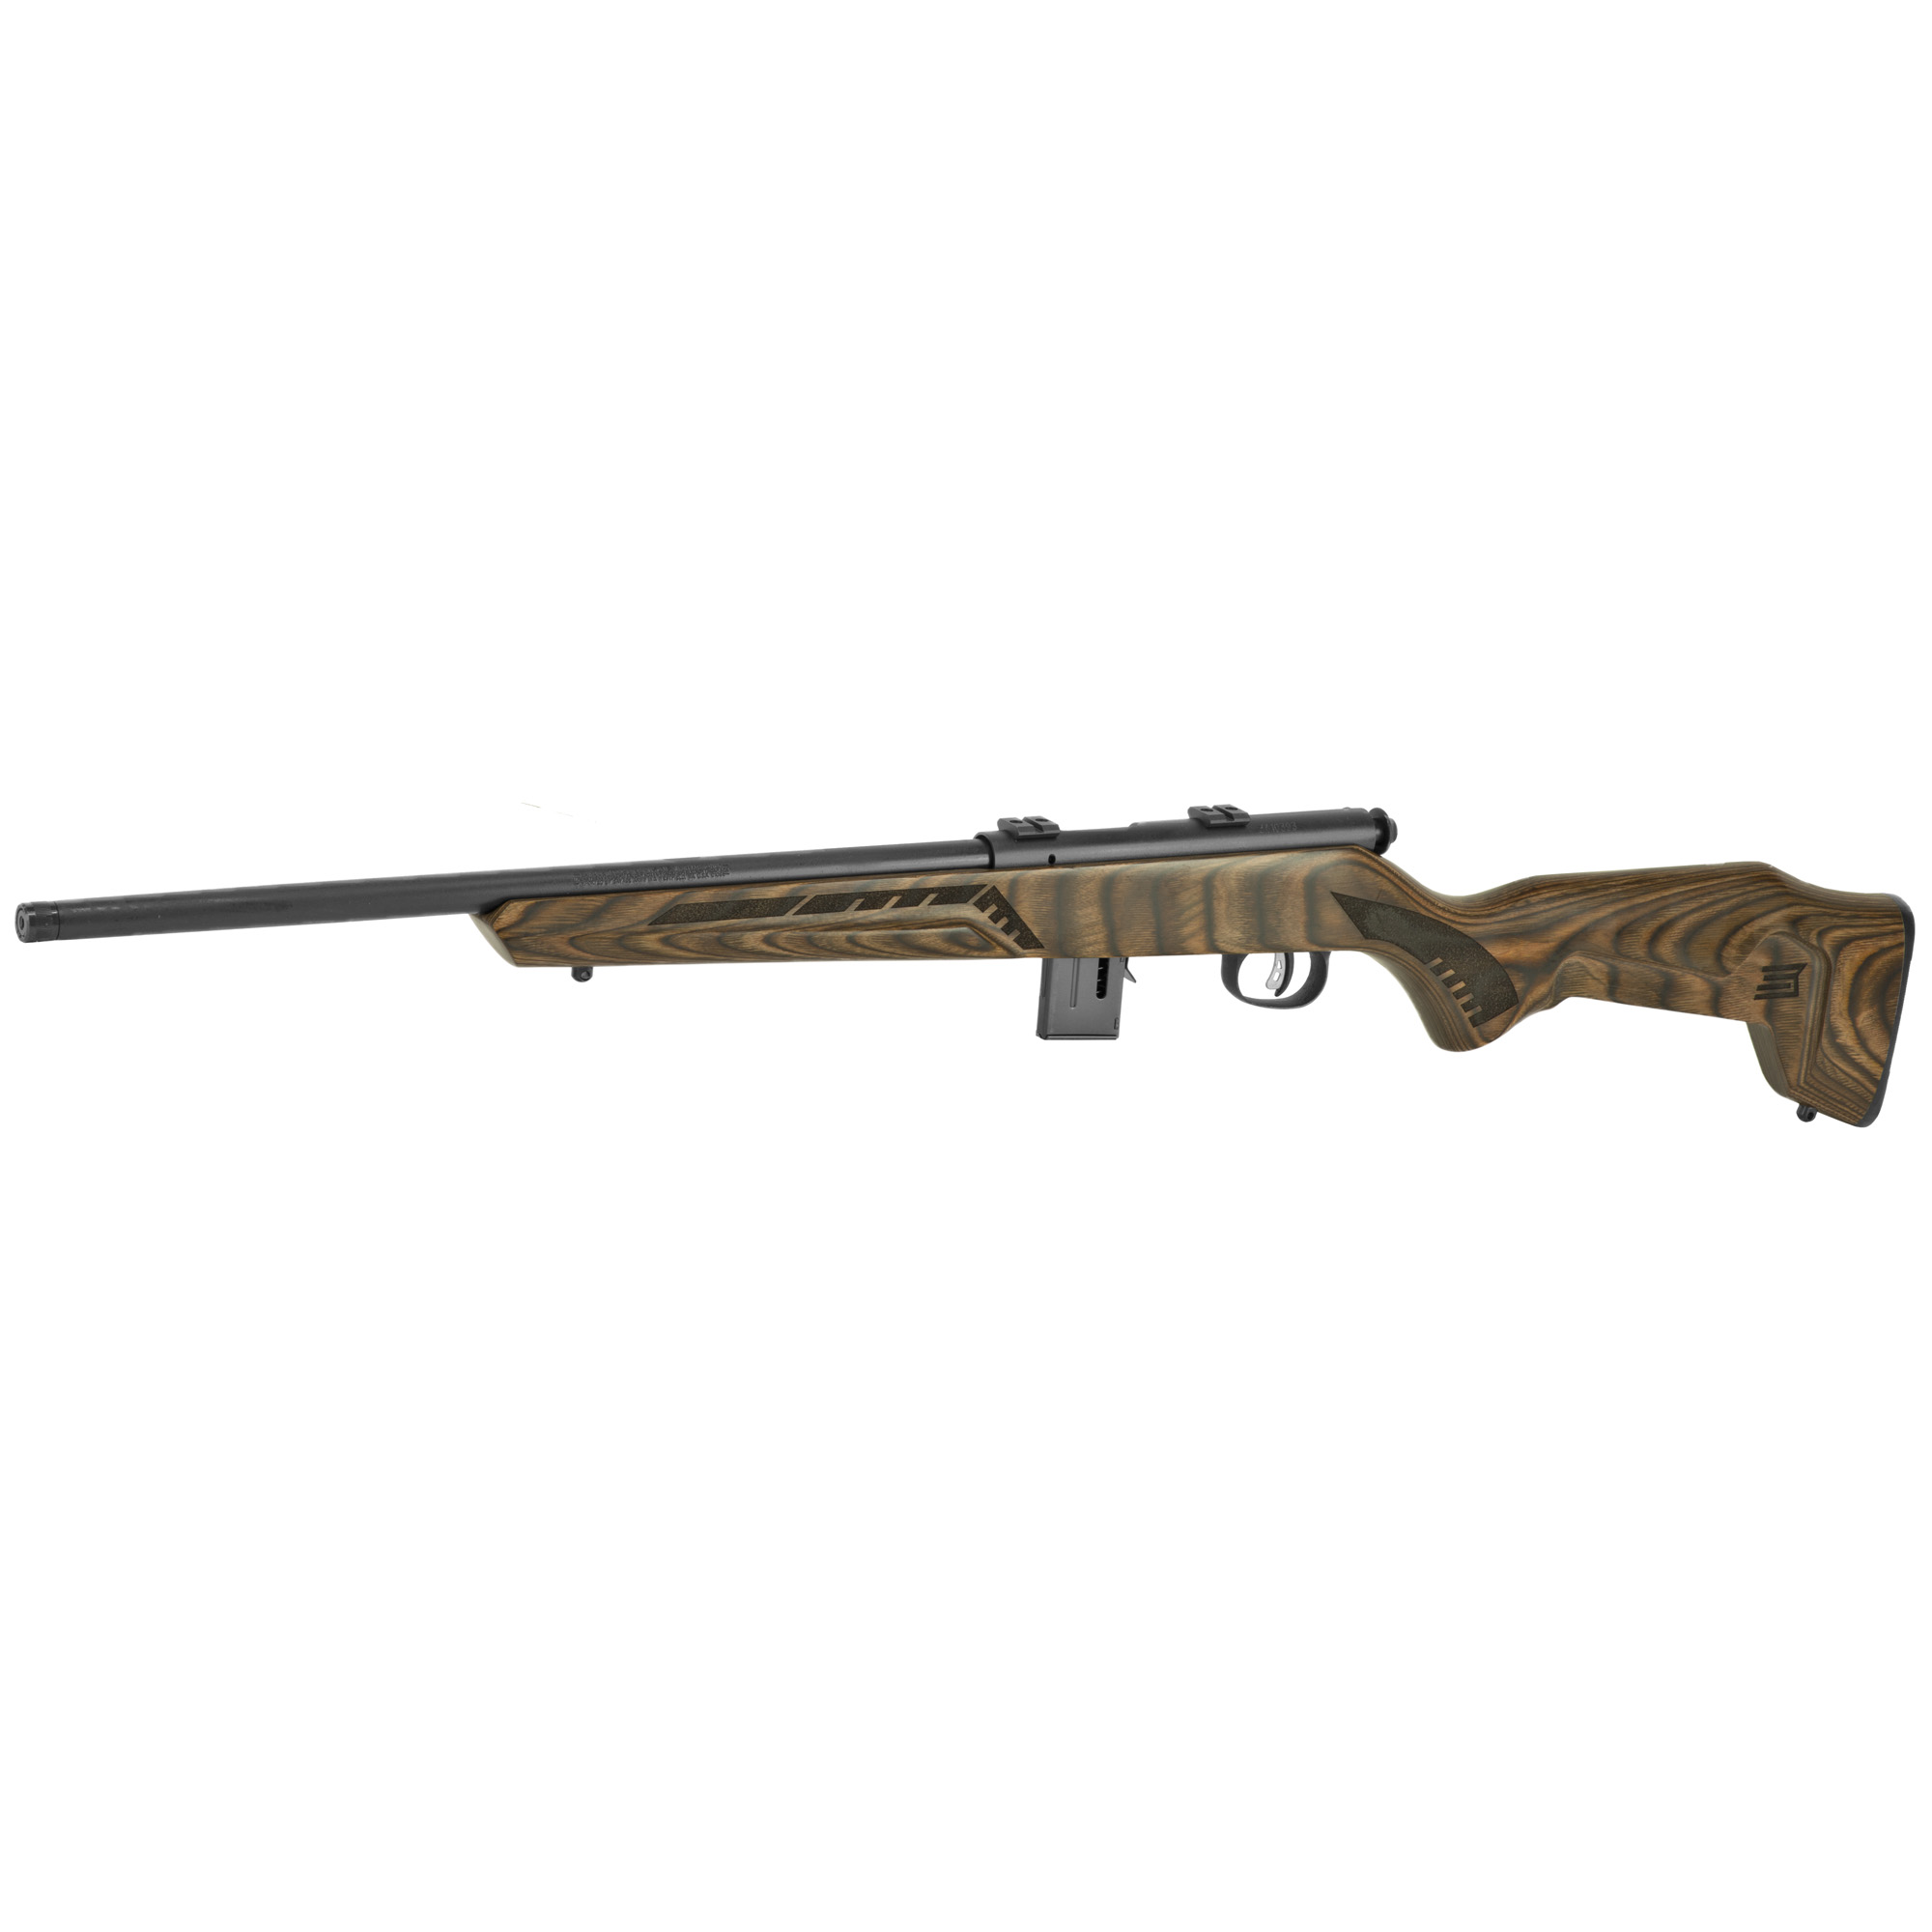 Savage, 93R17 Minimalist, Bolt Action, Rifle, 17 HMR, 18" Sporter Barrel, Brown Laminate , Laminate Stock, Right Hand, 10Rd, Includes 2 piece Weaver Base And 1 10rd Magazine